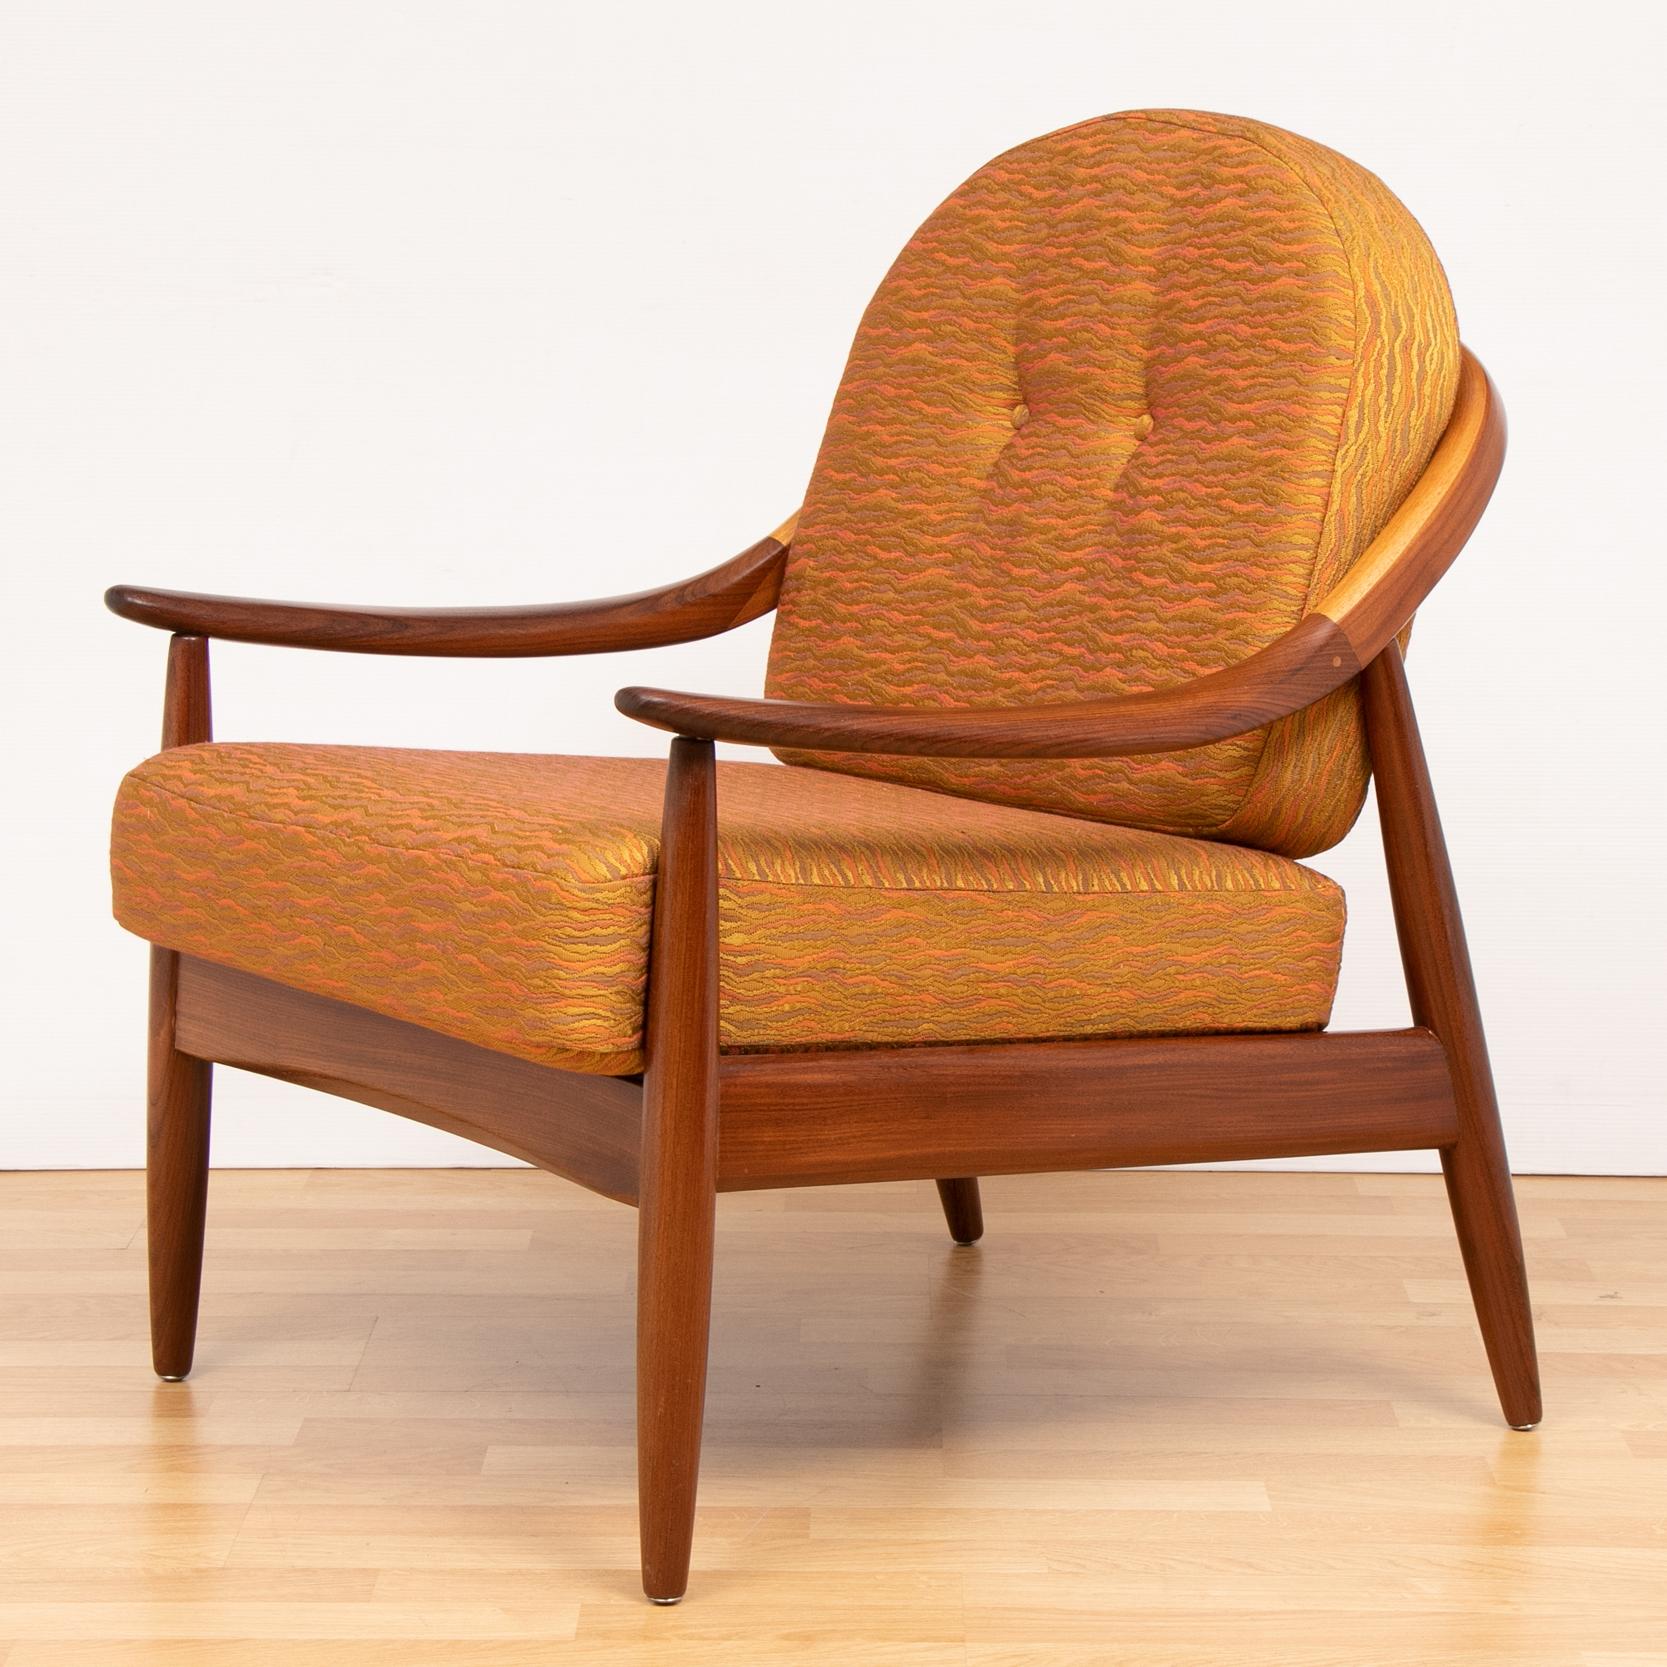 1960s Greaves and Thomas teak bentwood armchair. The chair is formed from steam bent solid teak with curved sweeping armrests and a flared spindle back. The legs are constructed from turned, tapered, flared legs. The seat and buttoned back cushion